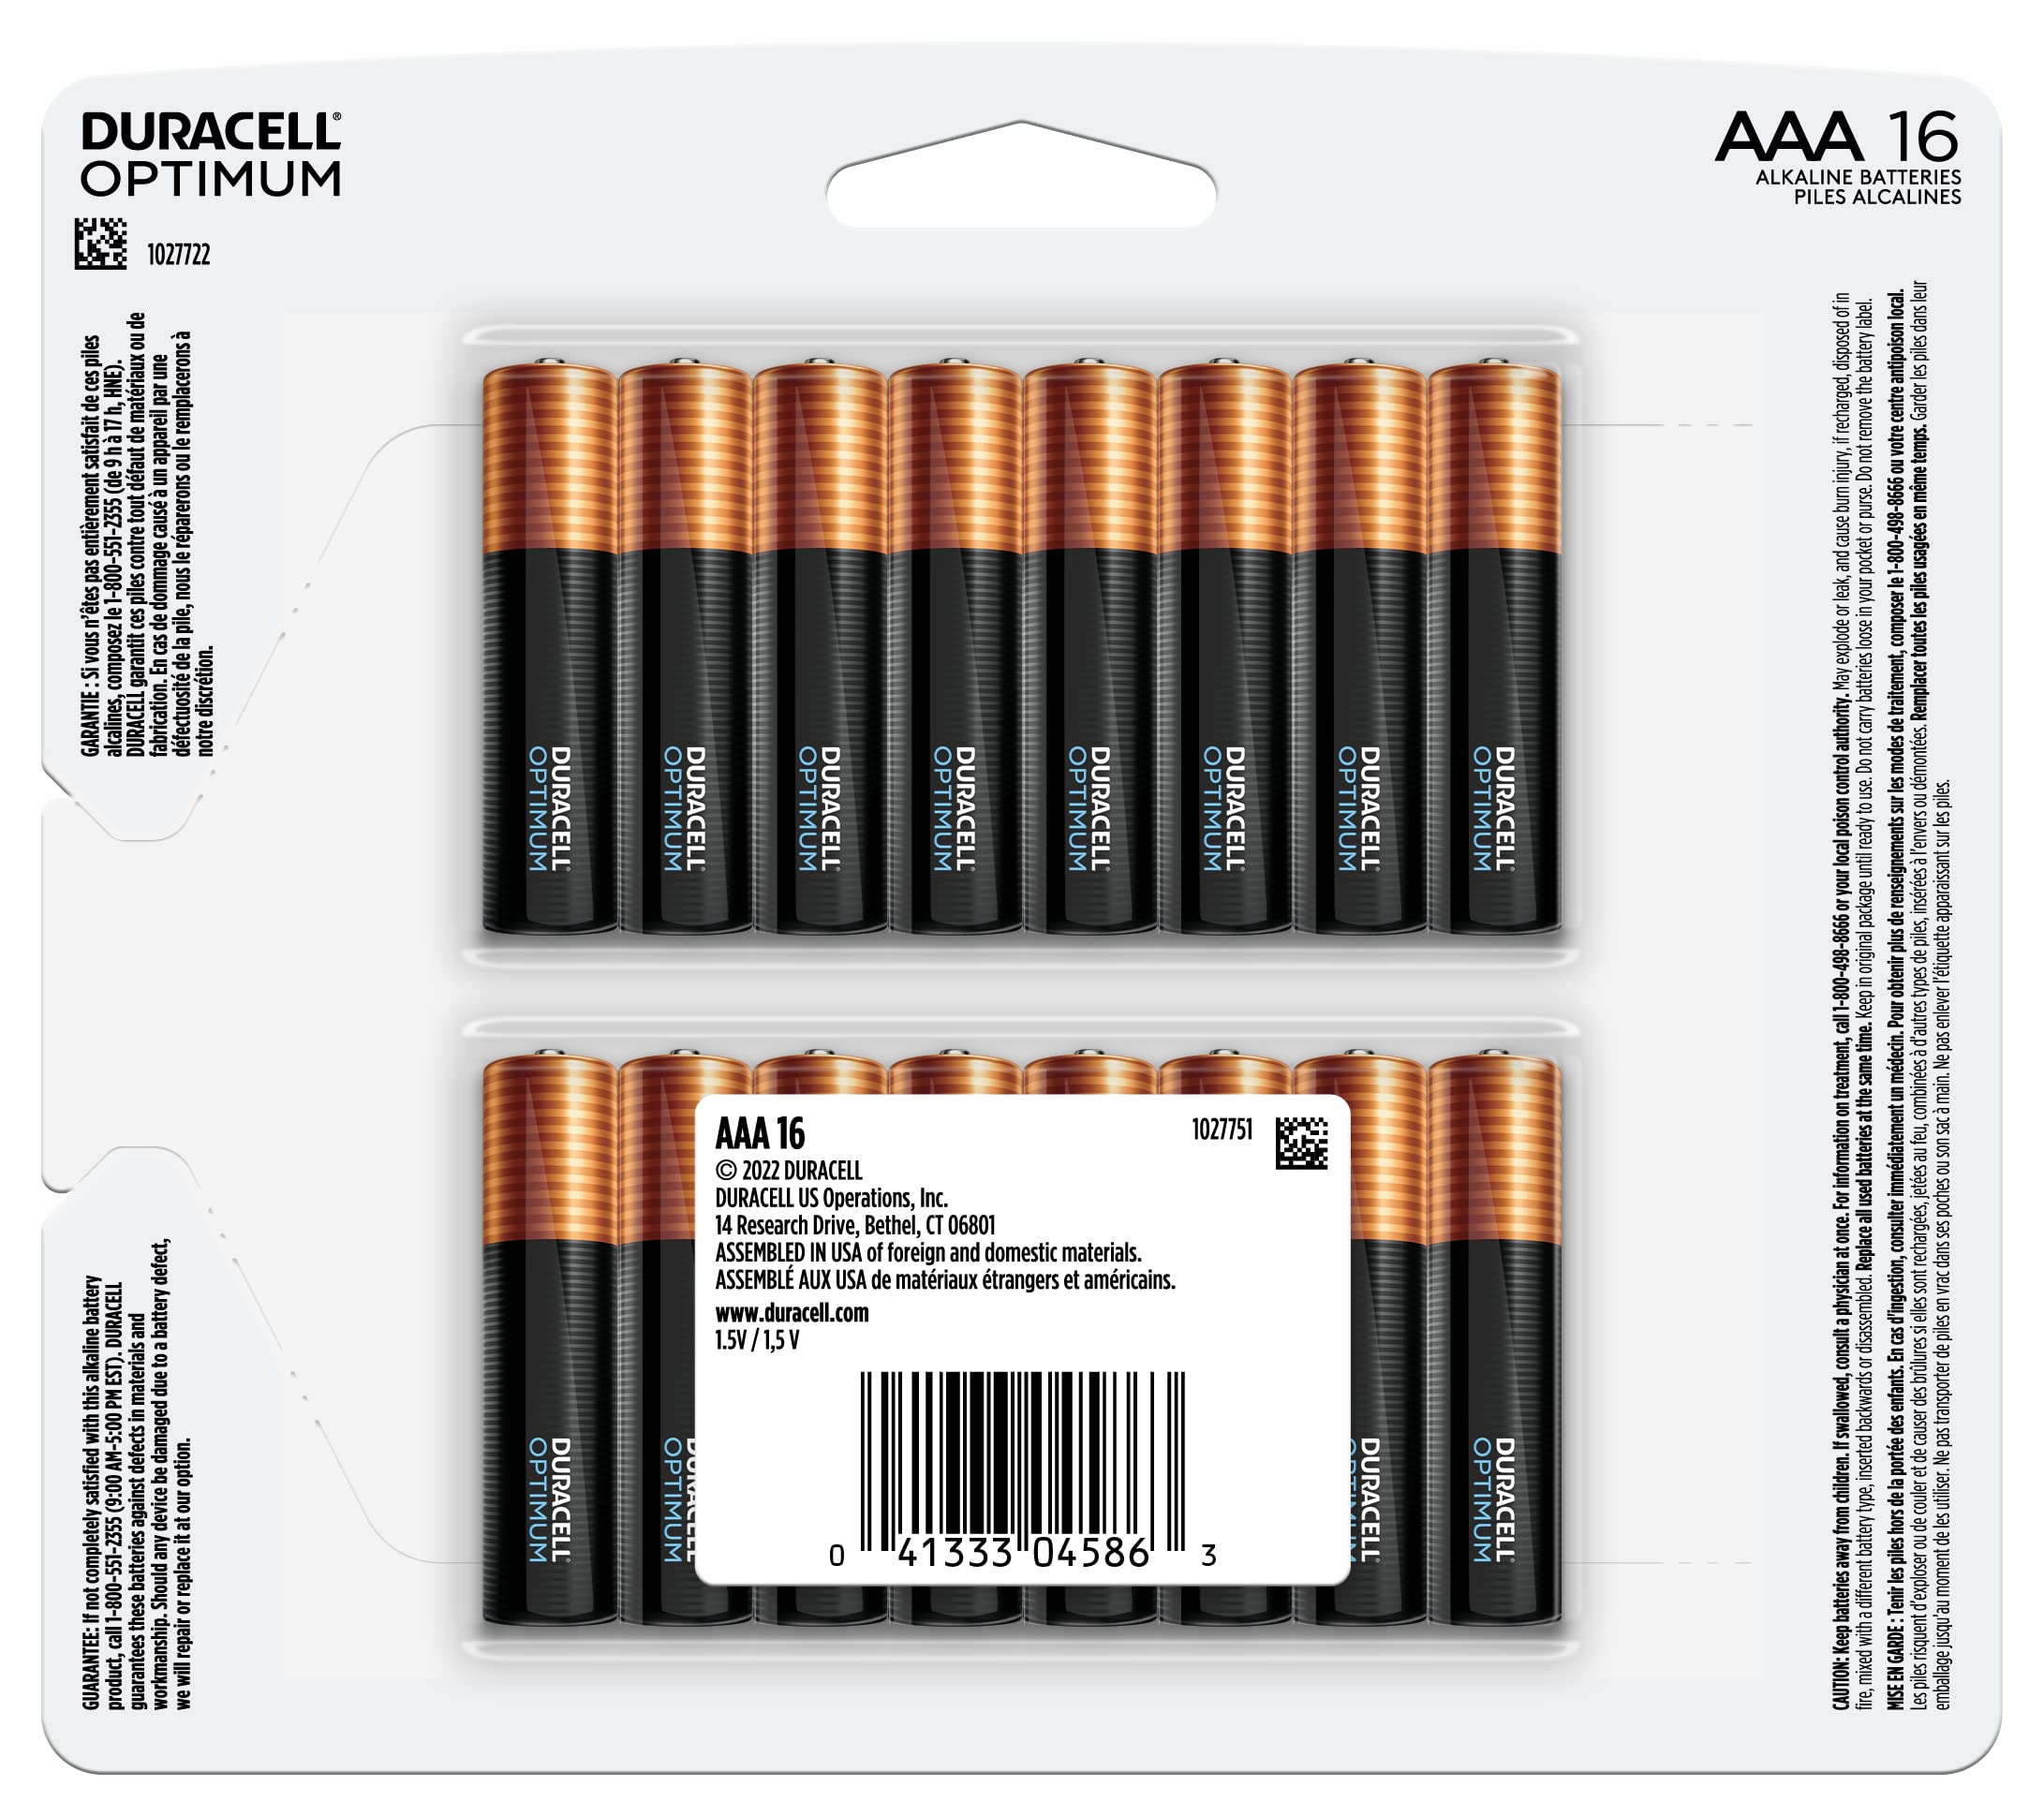 Duracell Optimum AAA Batteries with Power Boost Ingredients, 16 Count Pack Double A Battery with Long-Lasting Power, All-Purpose Alkaline AA Battery for Household and Office Devices